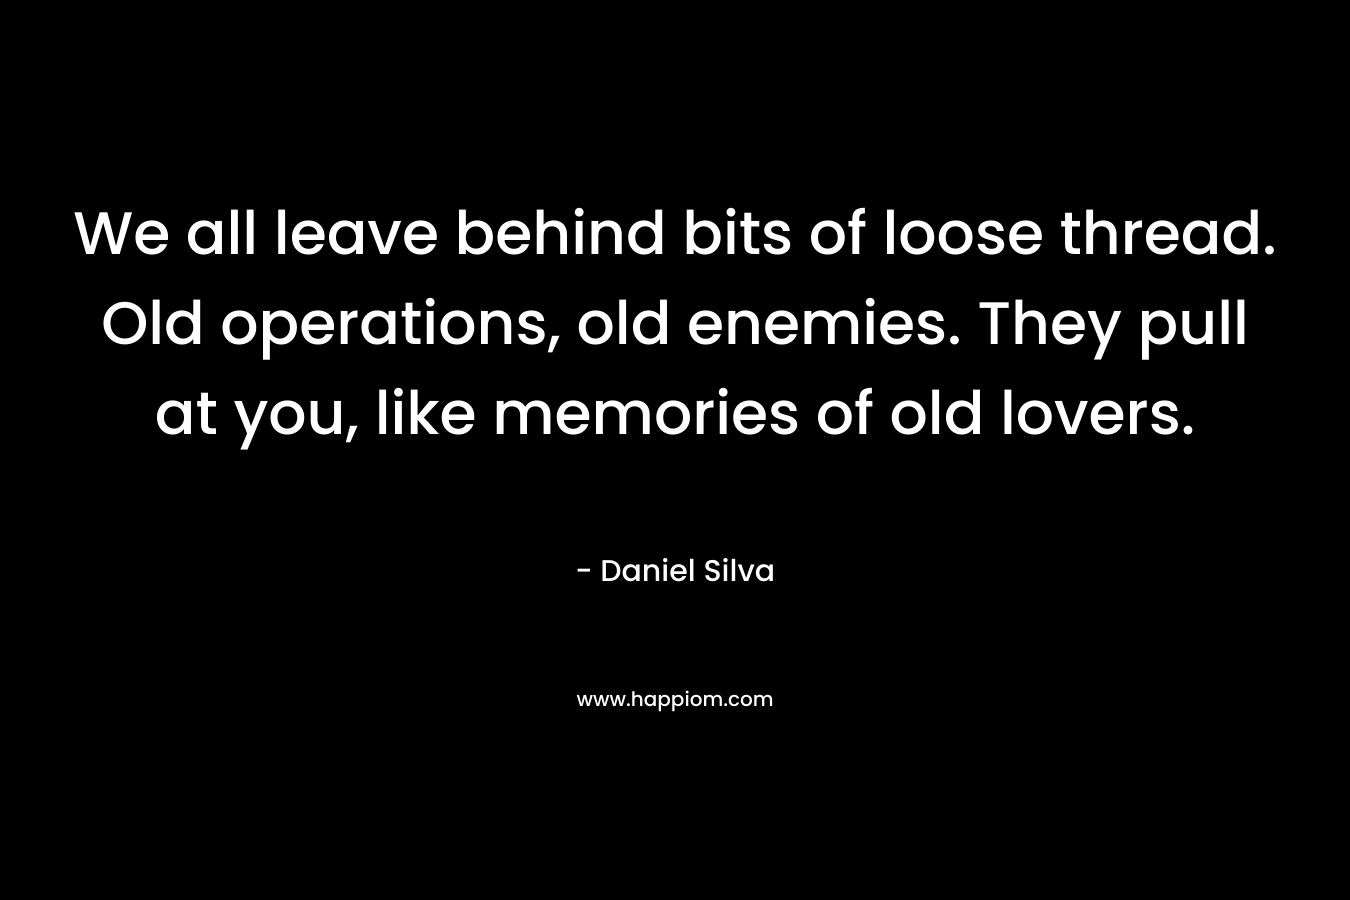 We all leave behind bits of loose thread. Old operations, old enemies. They pull at you, like memories of old lovers. – Daniel Silva